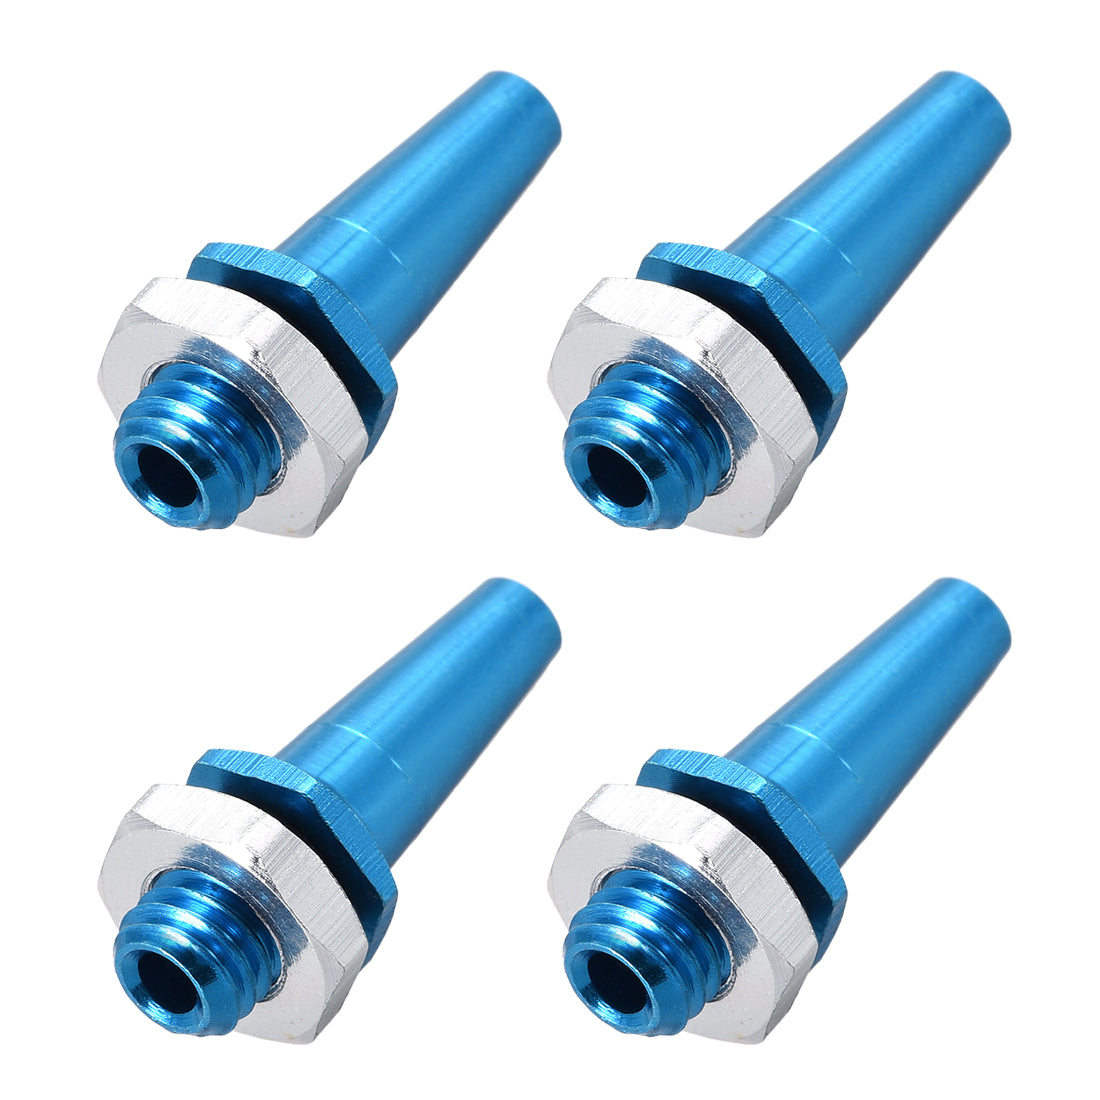 uxcell Uxcell RC Antenna Mount, M6 Thread, Aluminum Alloy, for RC Boat Blue 4pcs